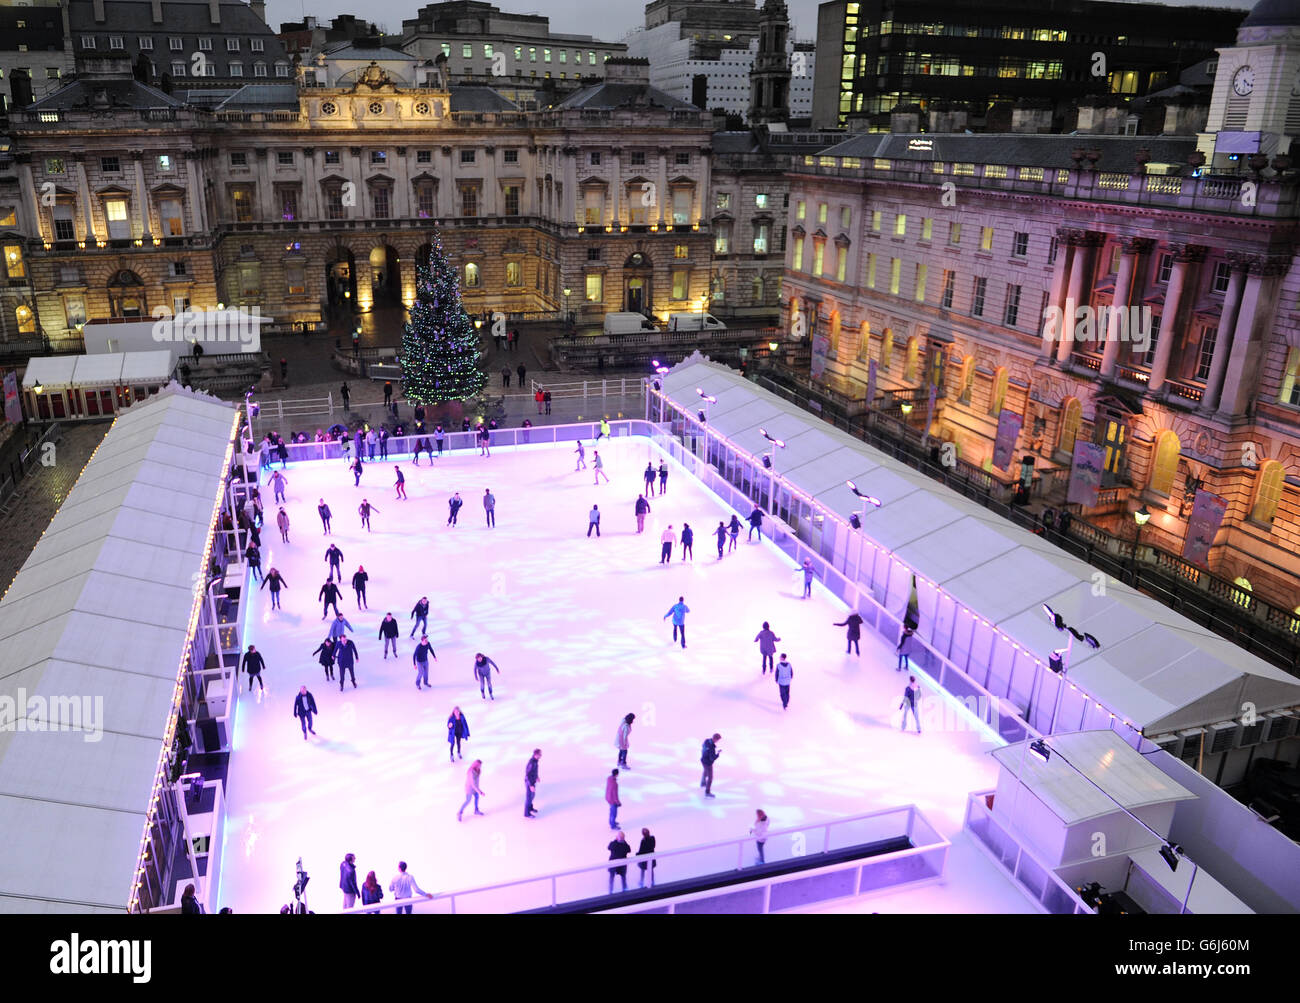 Members of the public on the ice rink at Somerset House. The rink is open from the 14th November to the 5th January. Stock Photo